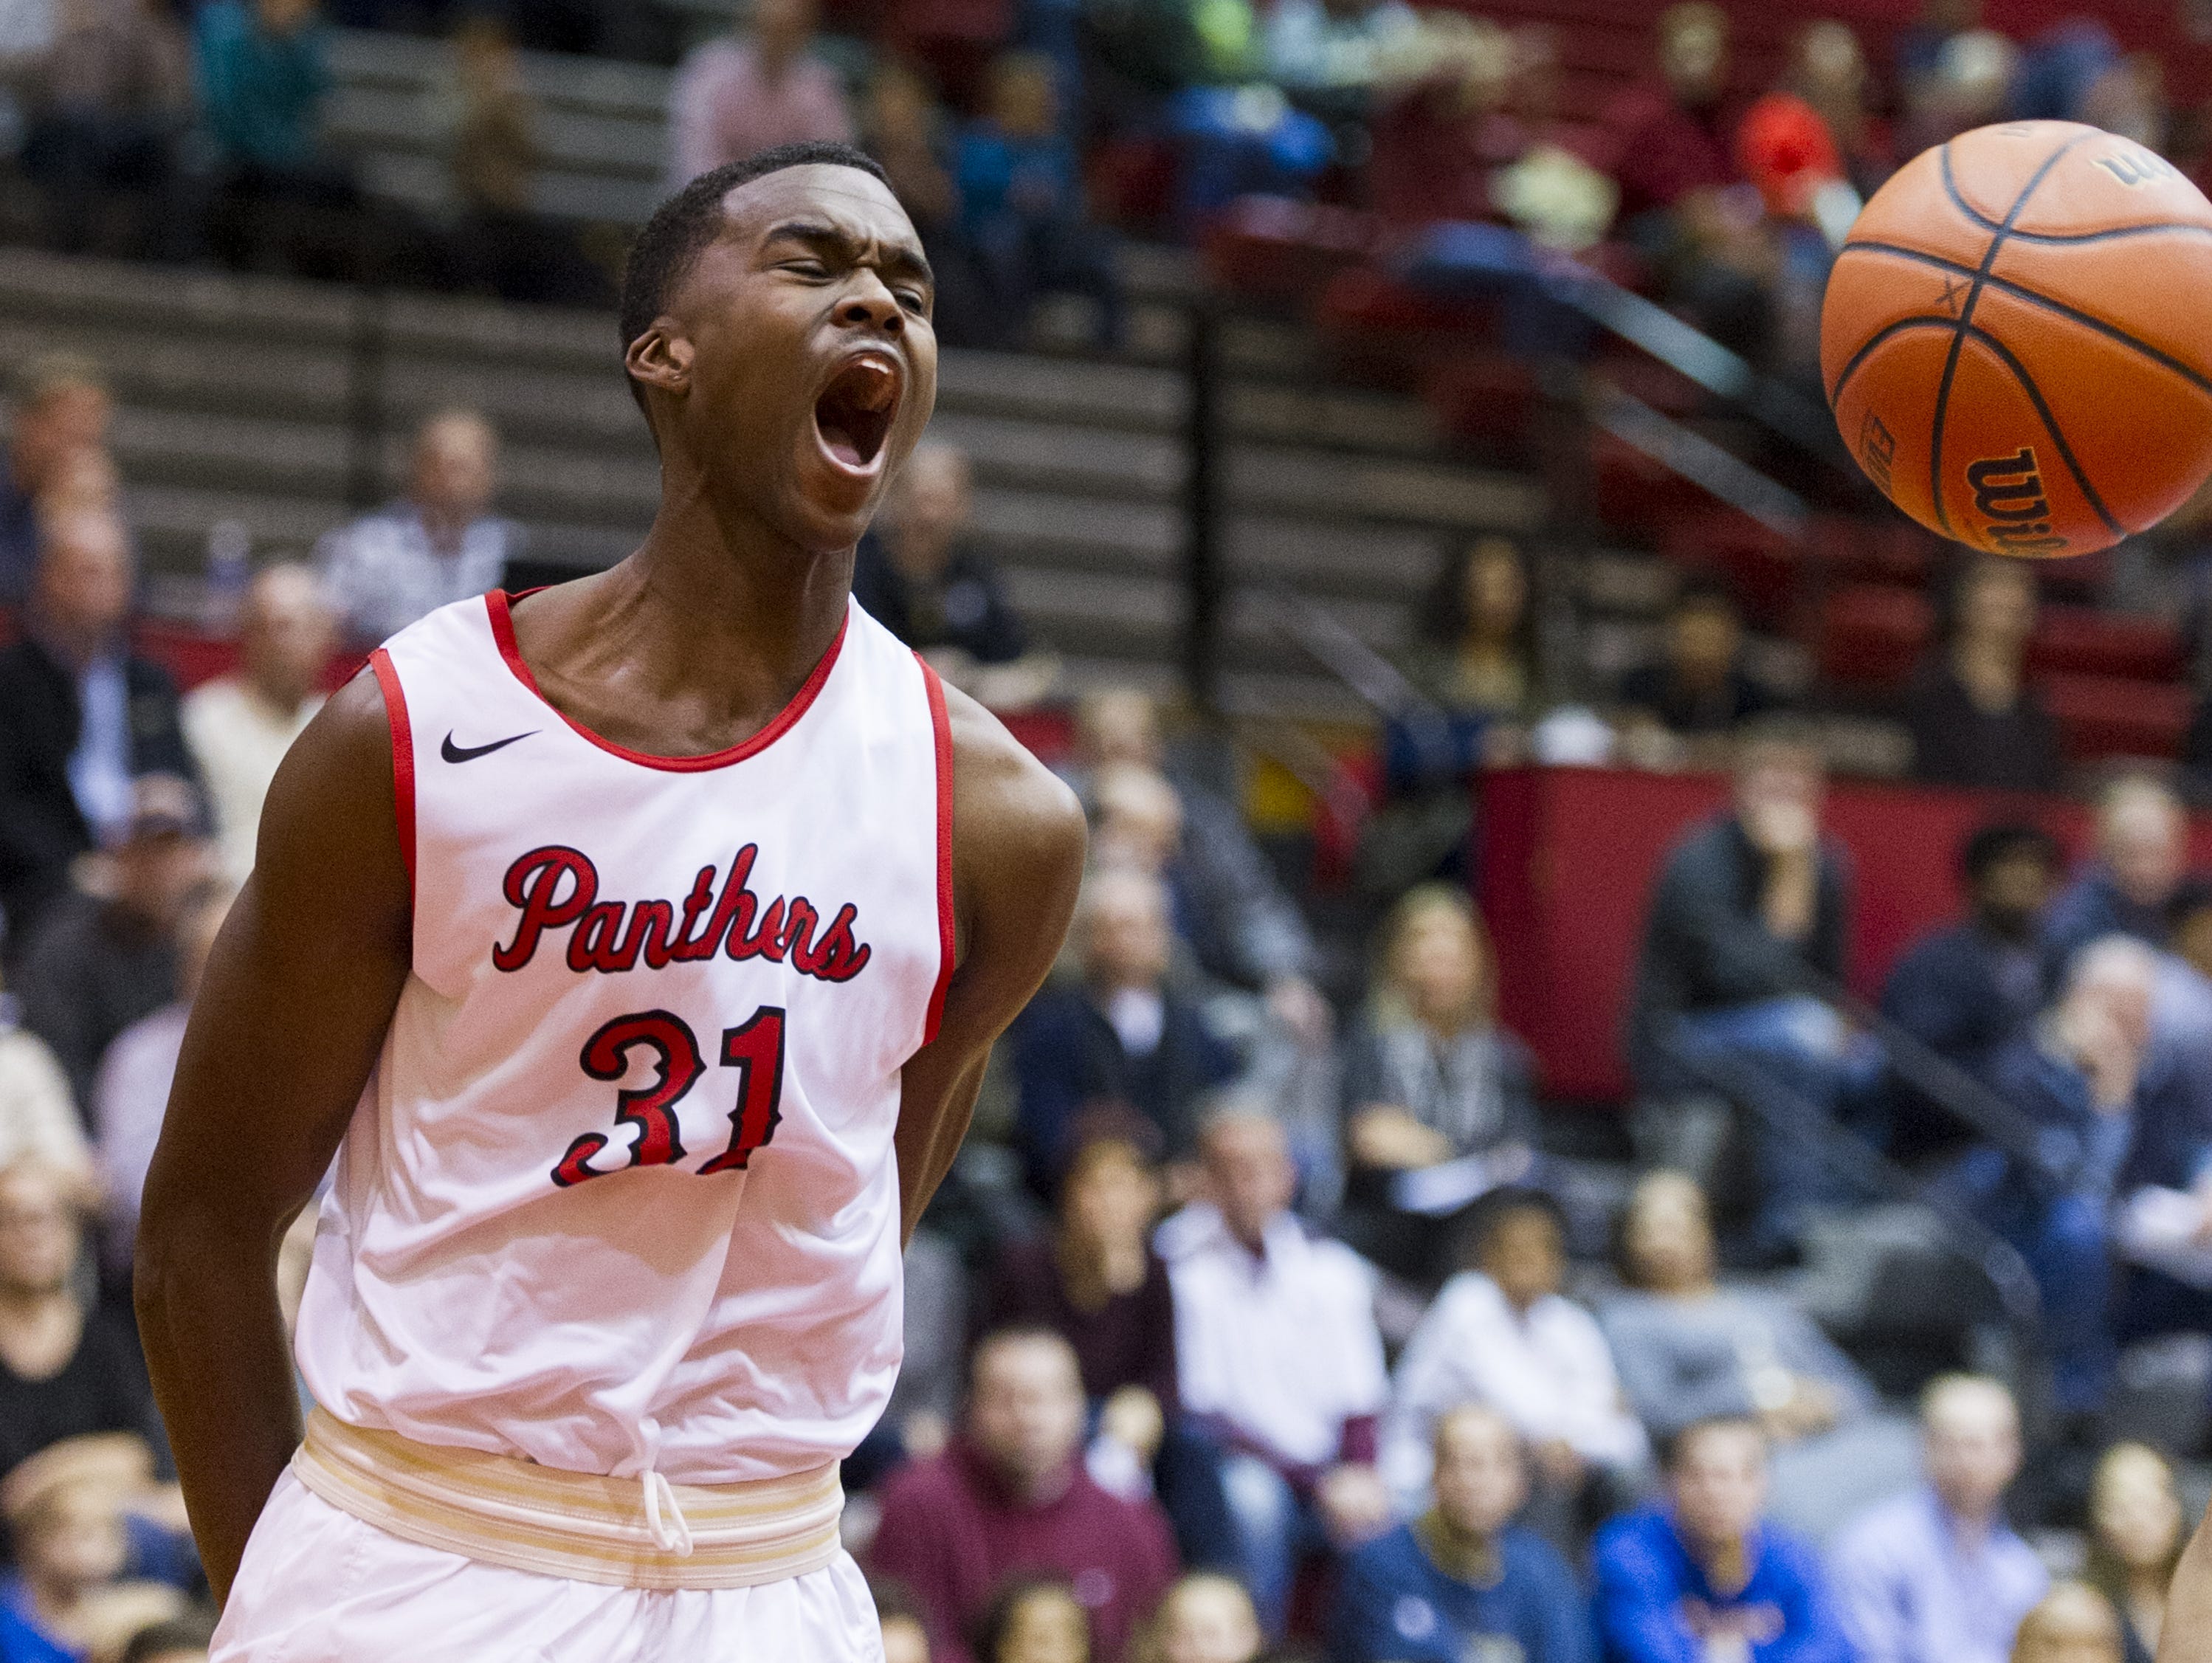 Kris Wilkes continues to collect offers from some of the top programs in the country.